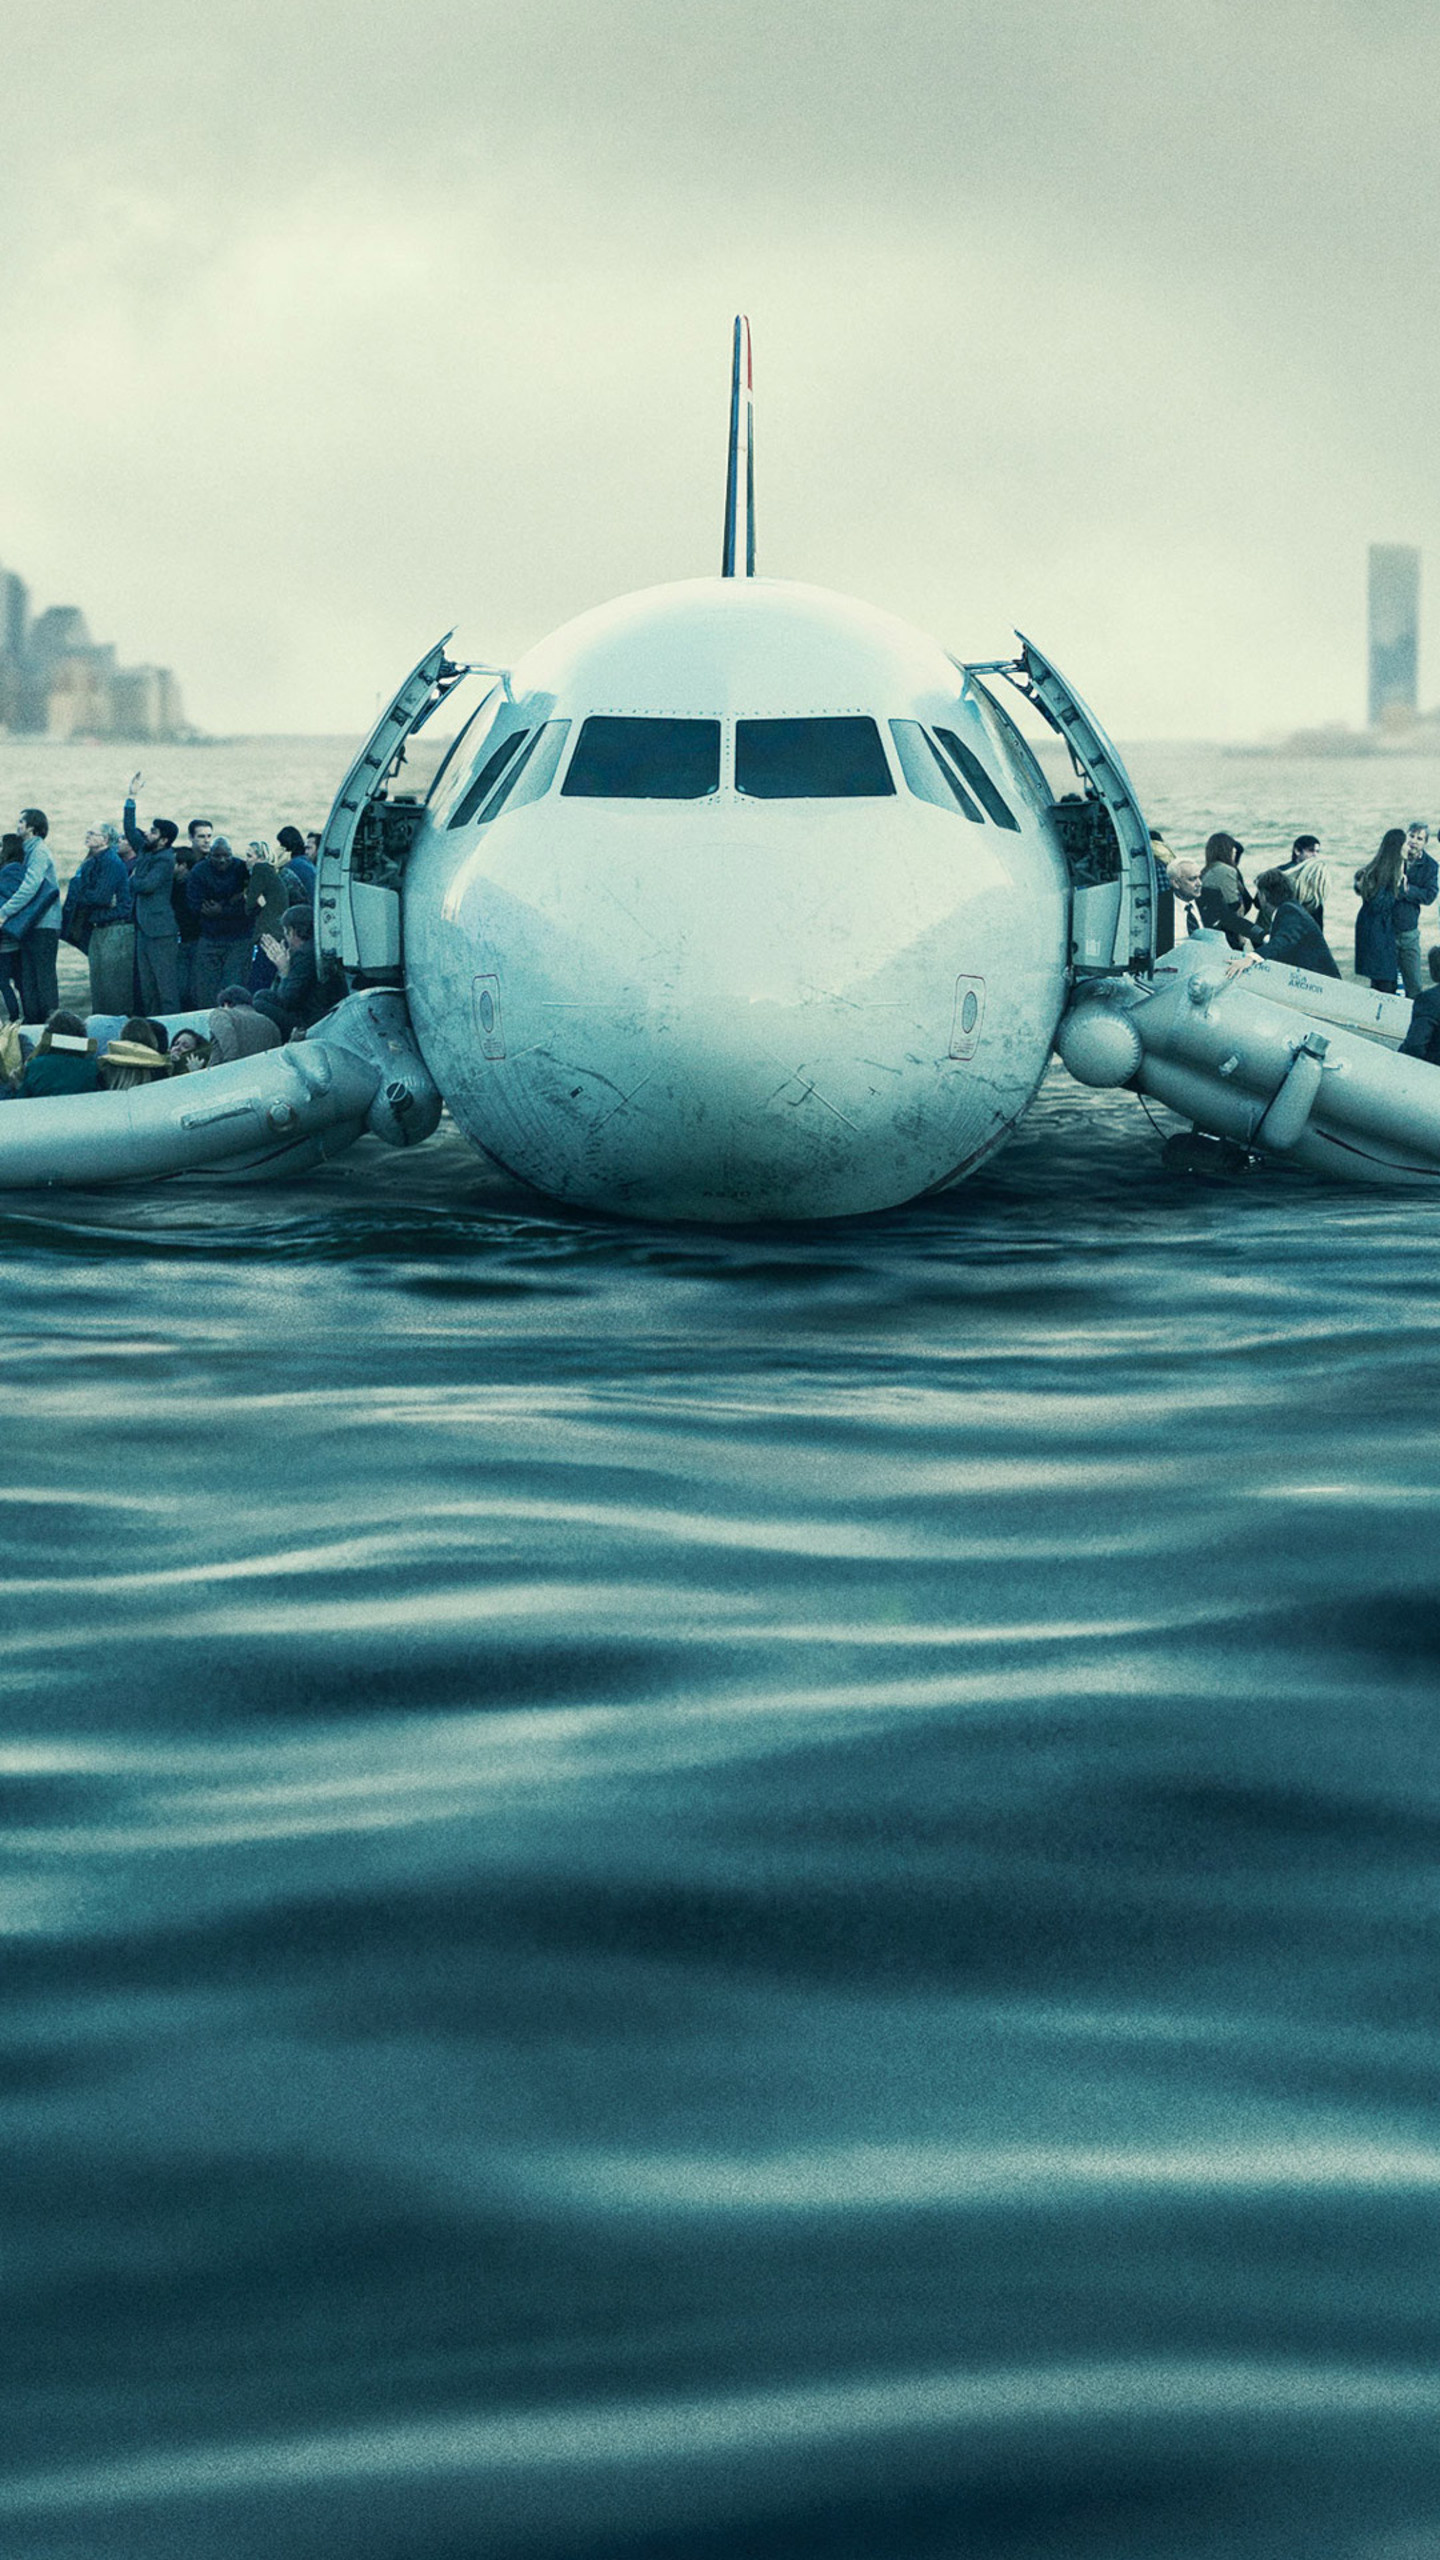 Sully movie, Galaxy S6 and S7 wallpapers, Inspiring story, HD images, 1440x2560 HD Phone